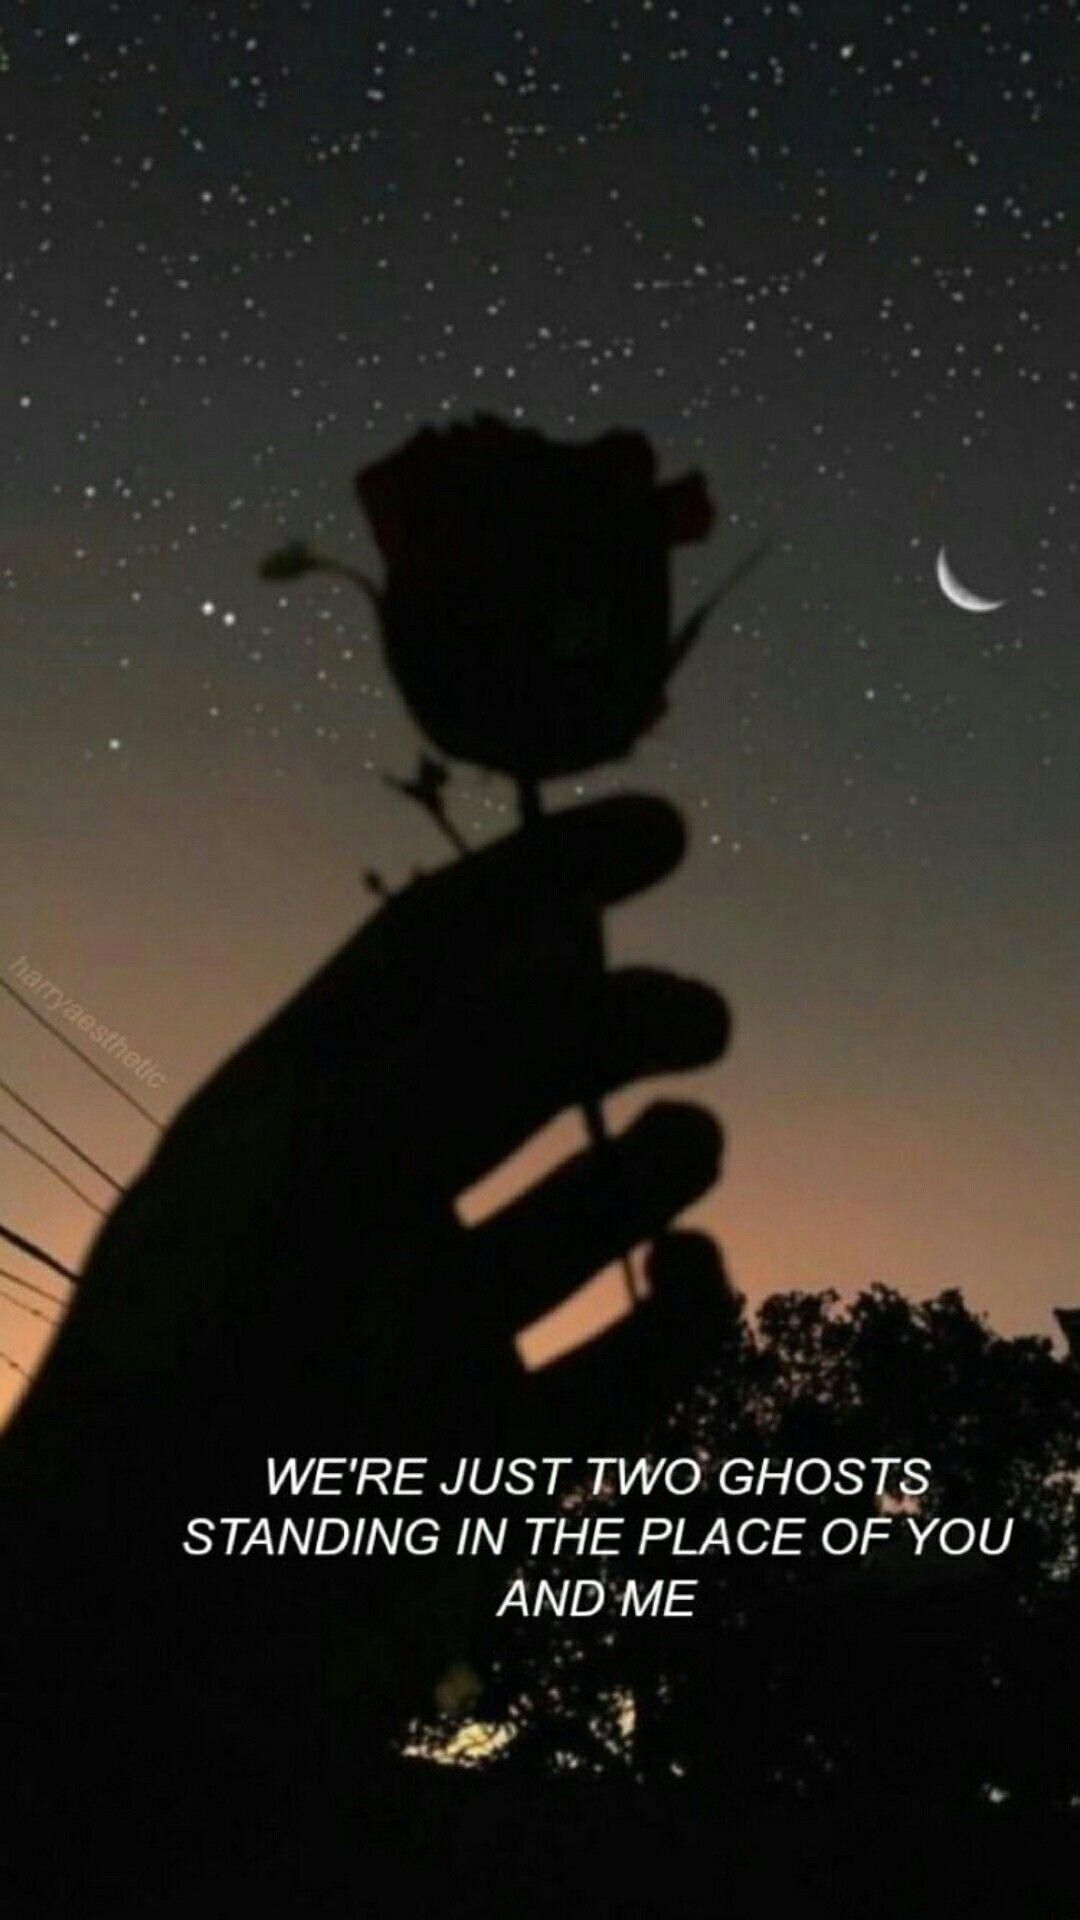 Two Ghosts by Harry Styles #harrystyleswallpaper. Harry styles quotes, Style lyrics, Harry styles songs